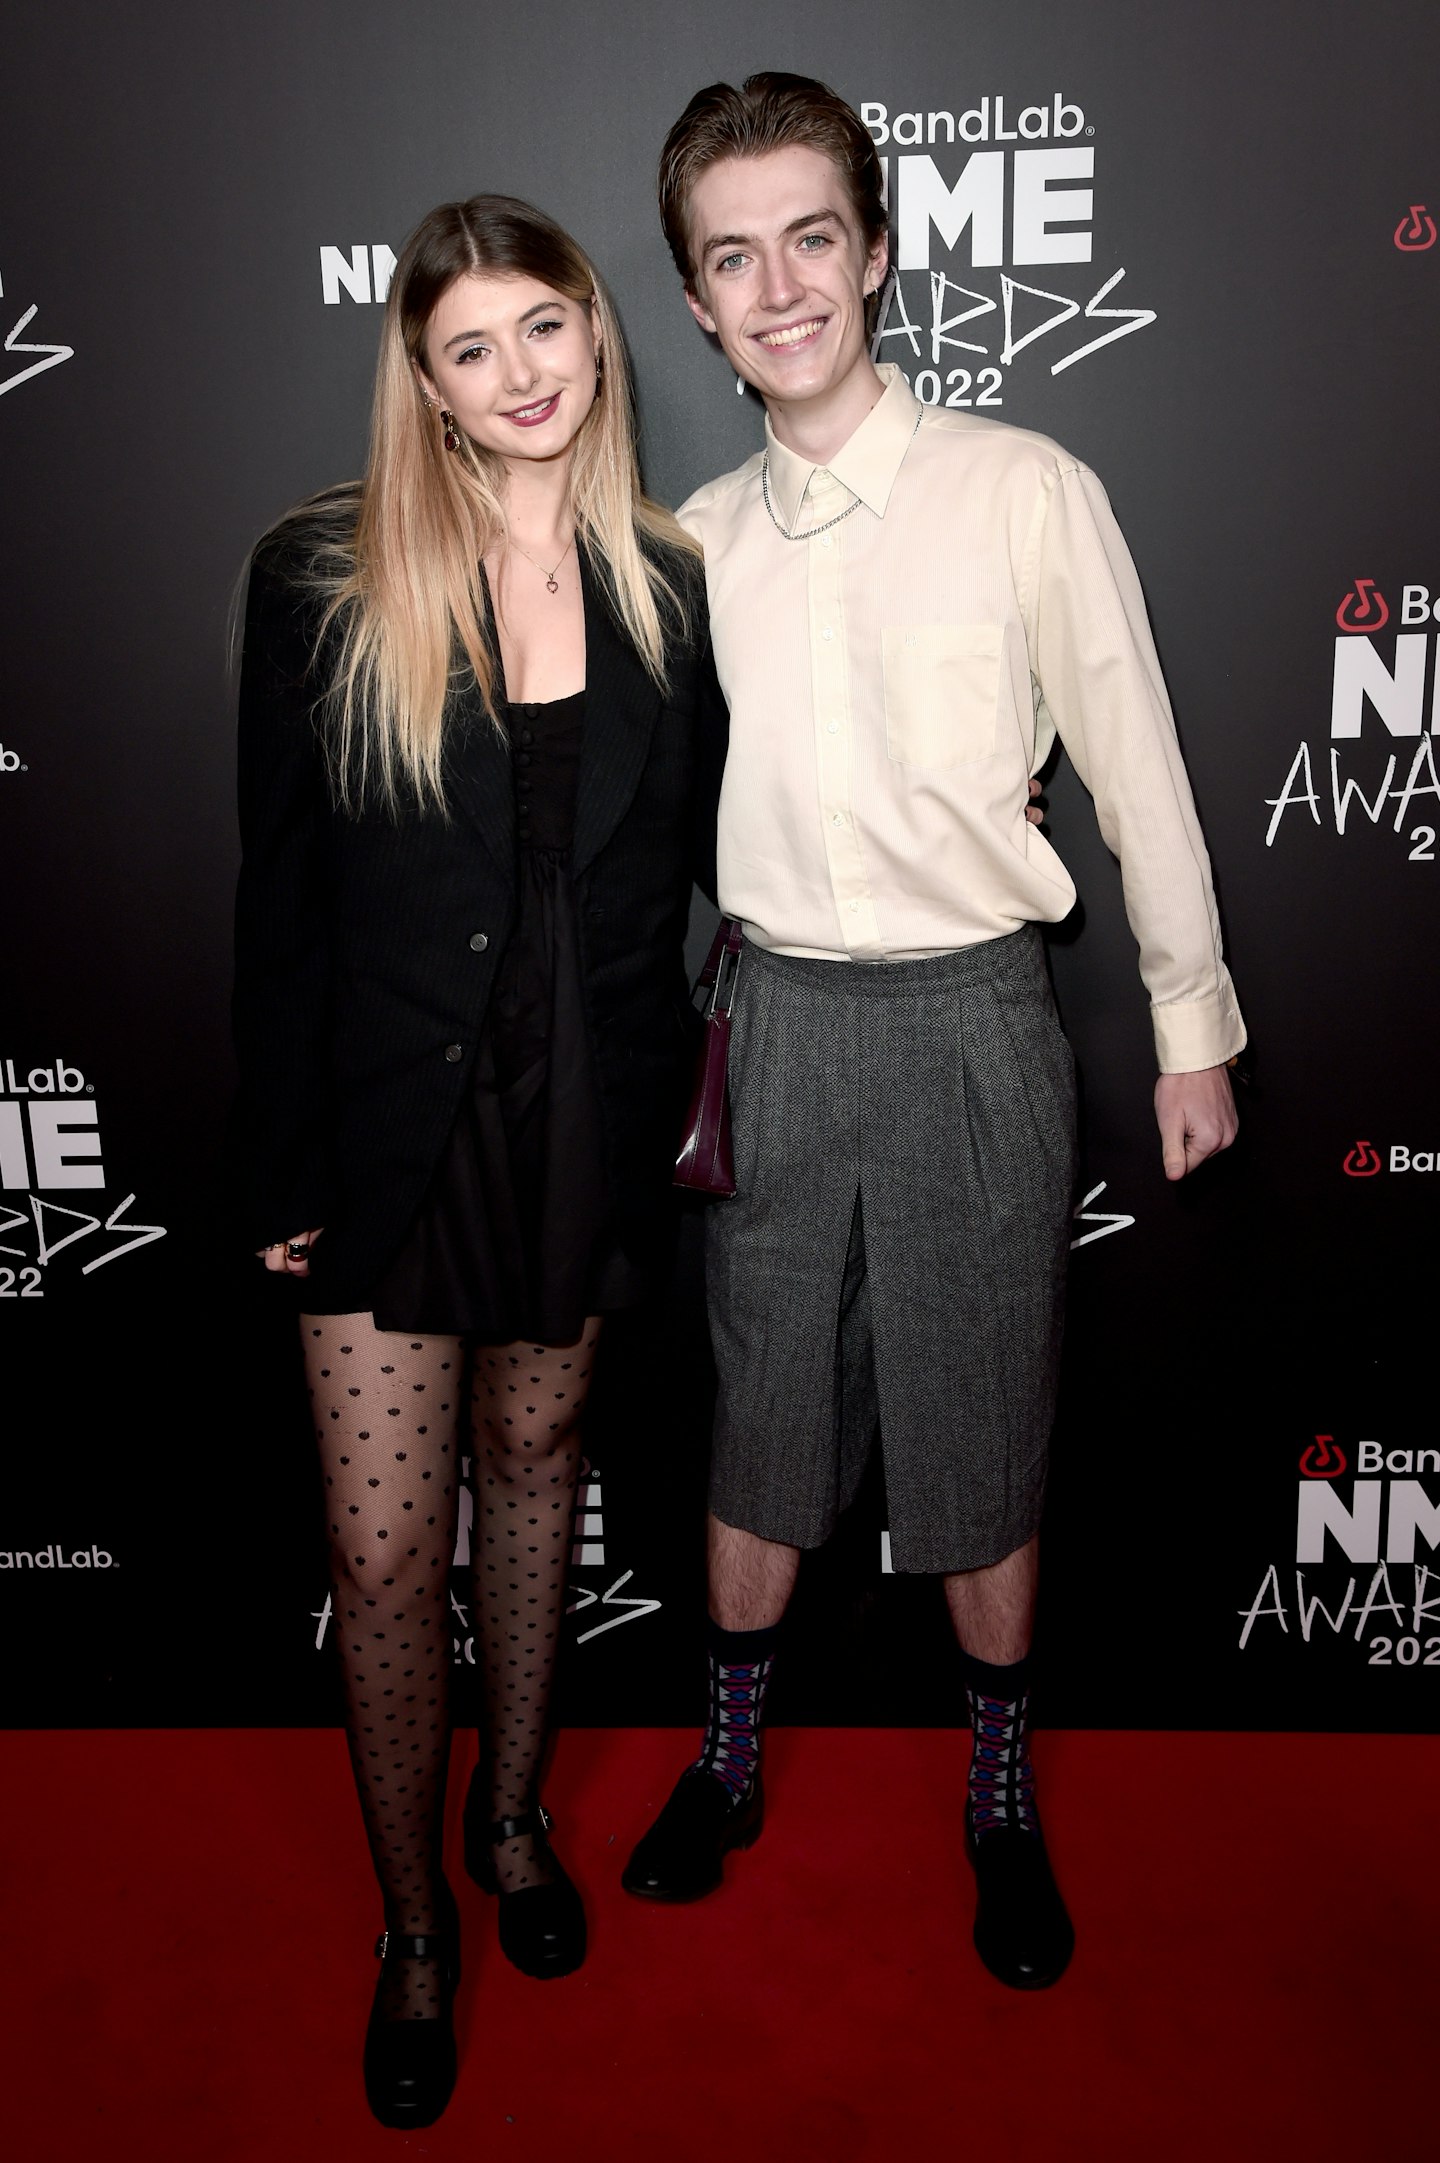 Francis Bourgeois and Amy Linkin at the NME Awards